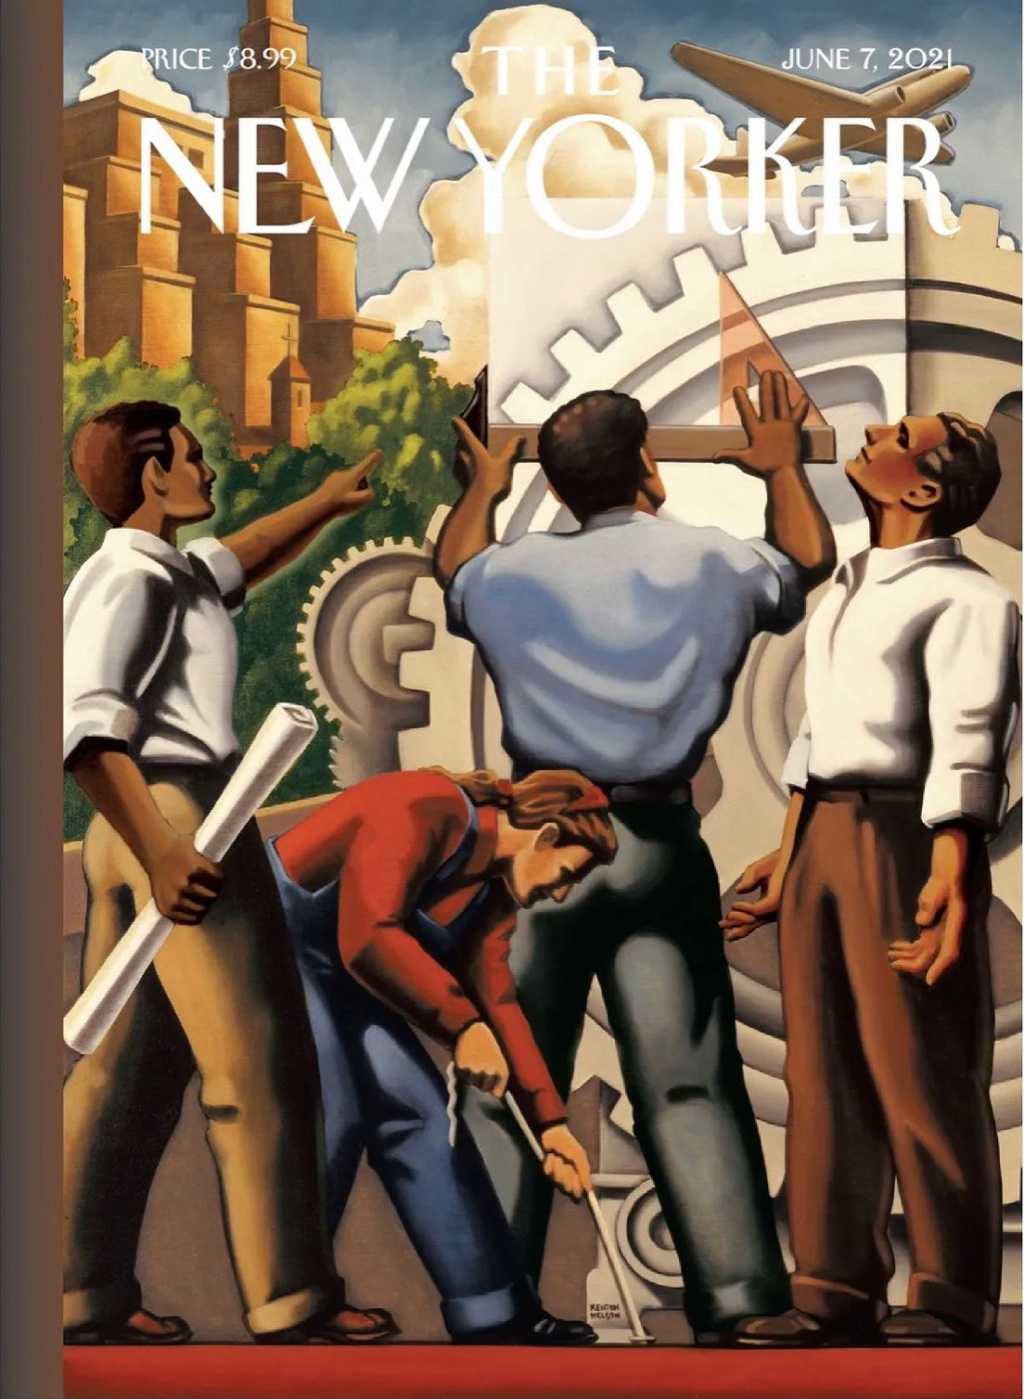 The New Yorker : Les couvertures Akento10